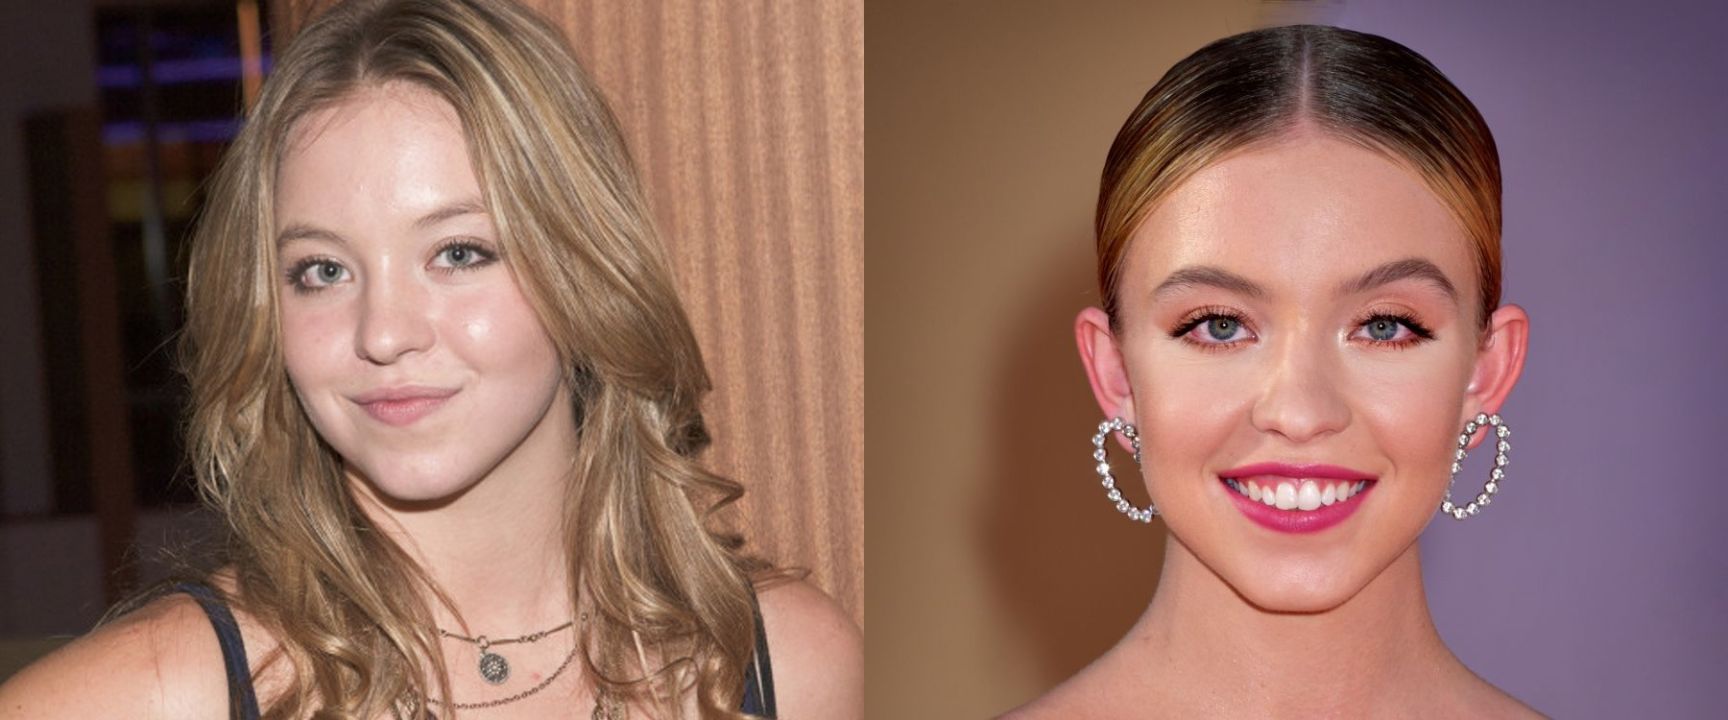 Sydney Sweeney's before and after pictures